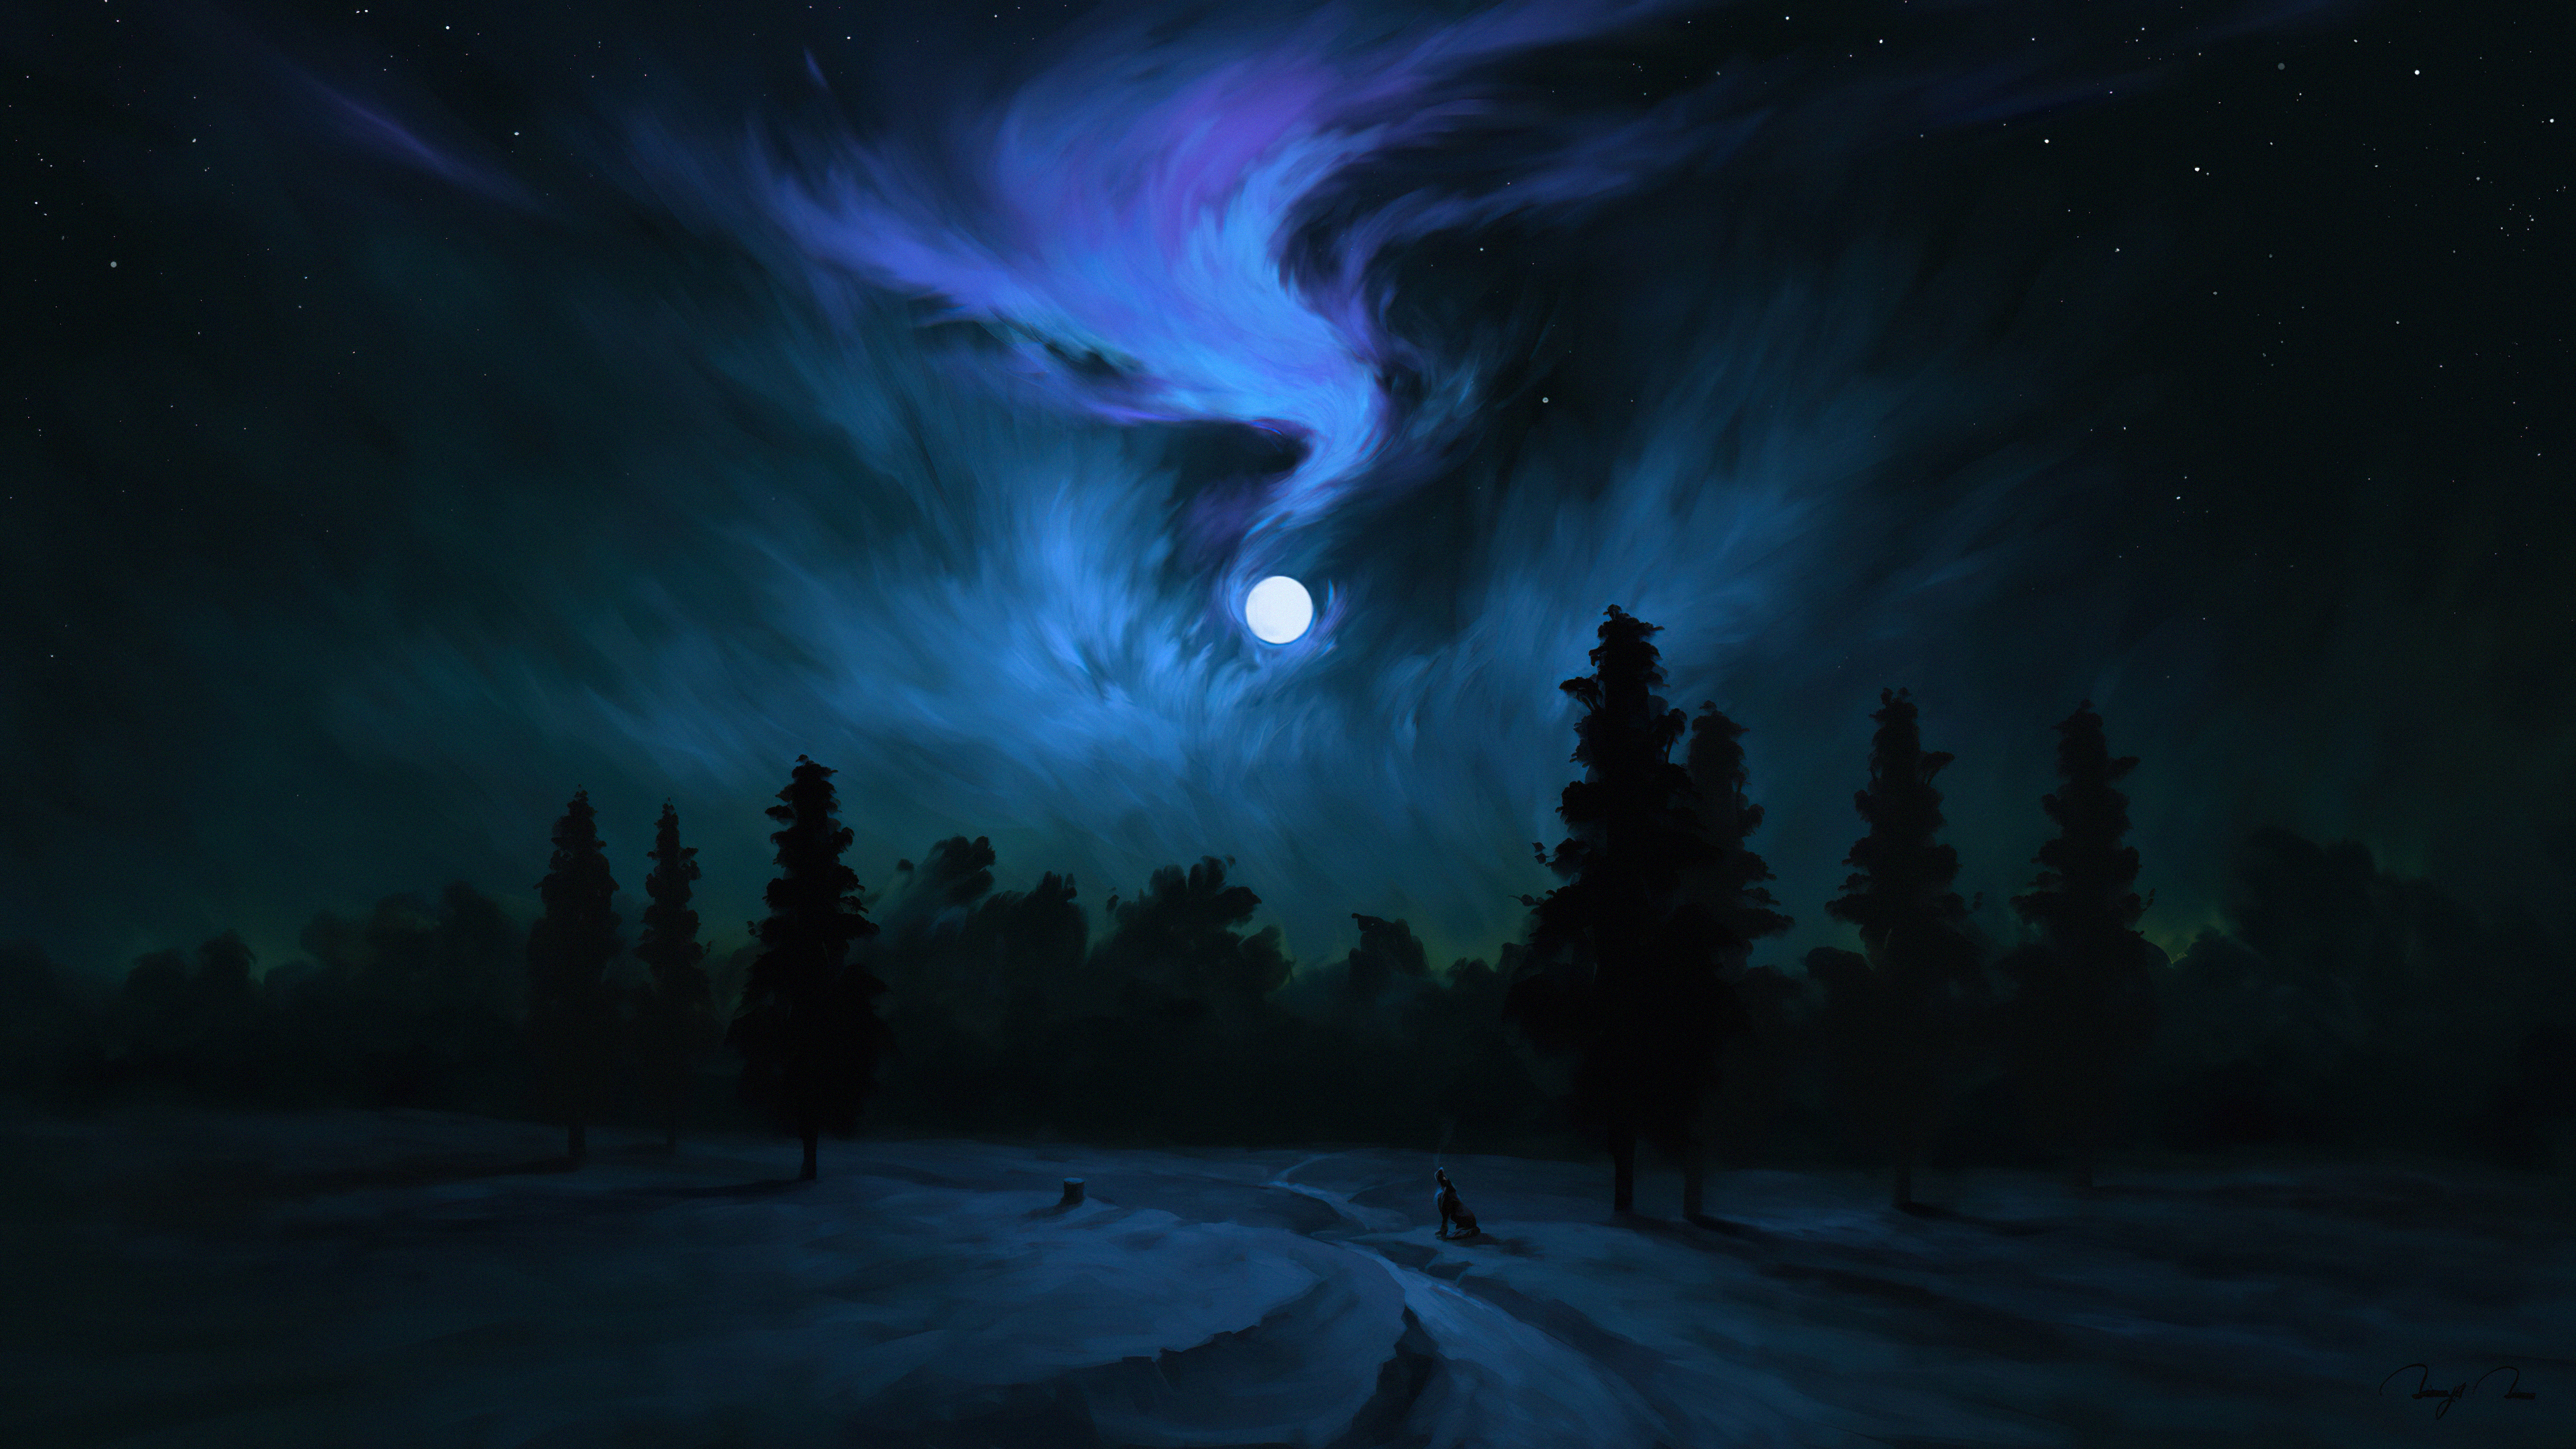 Drawing of the night sky in blue